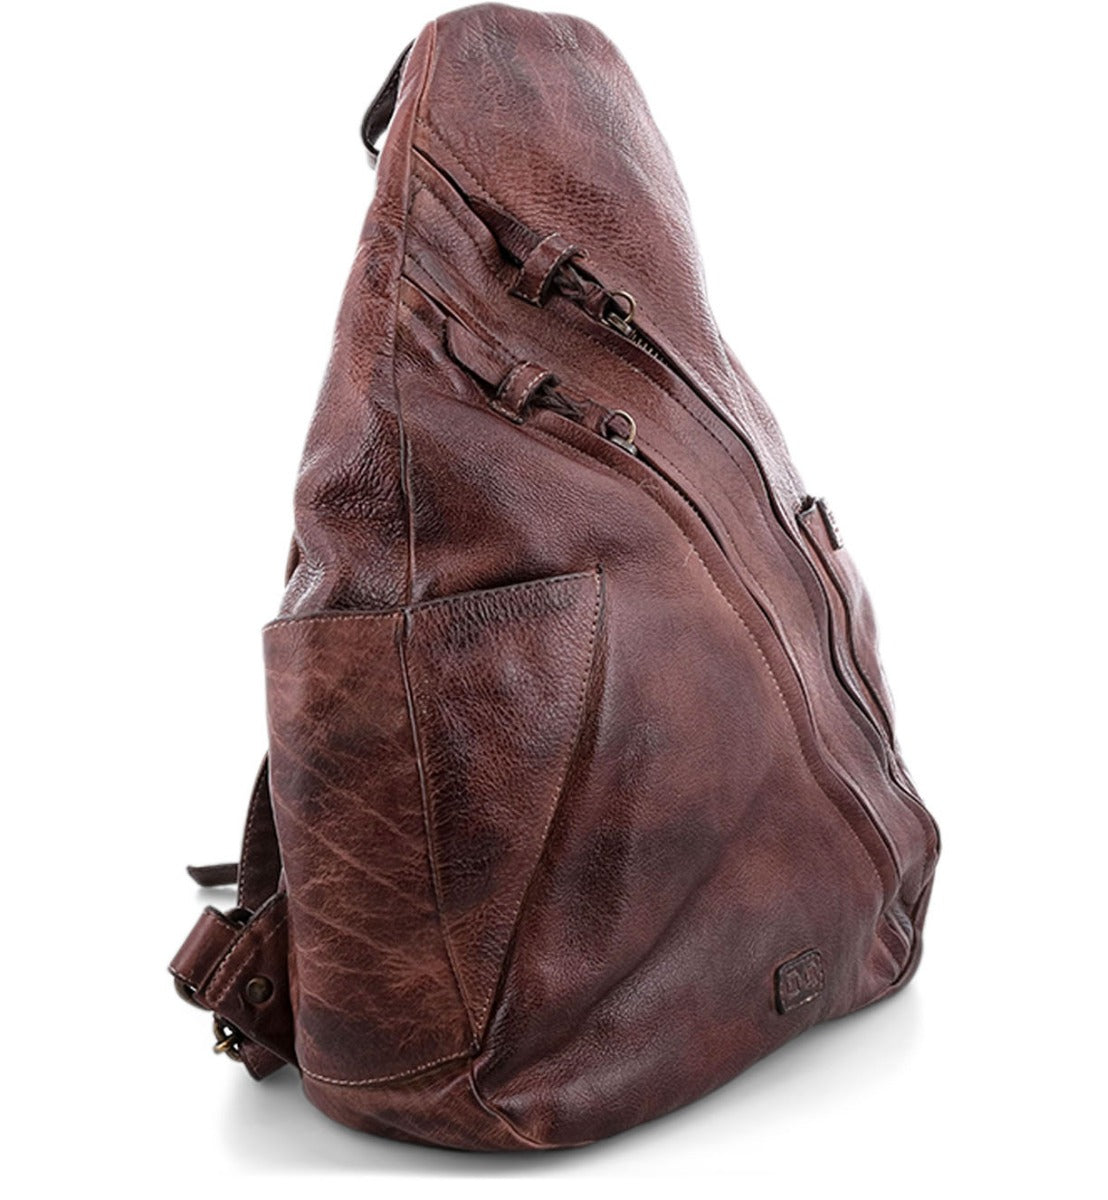 A Tommie by Bed Stu brown leather backpack on a white background.